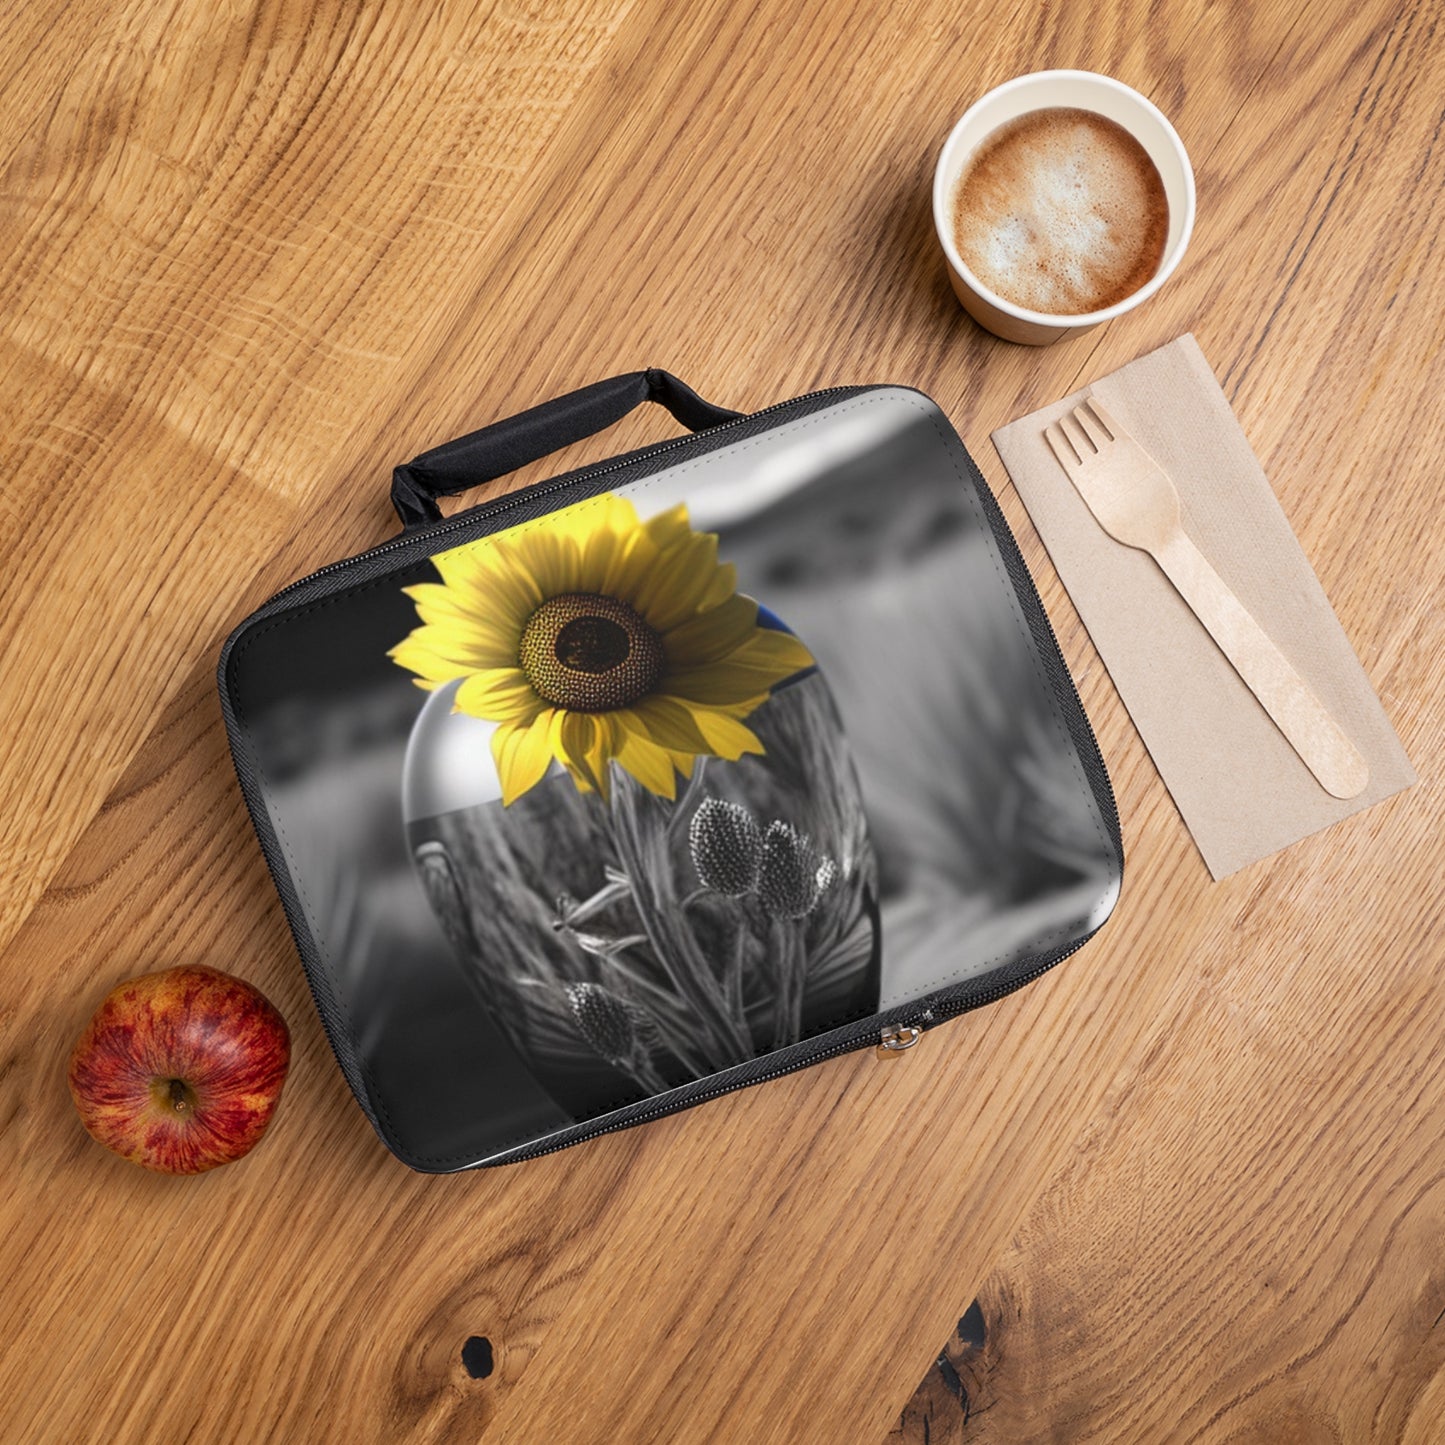 Lunch Bag Yellw Sunflower in a vase 3